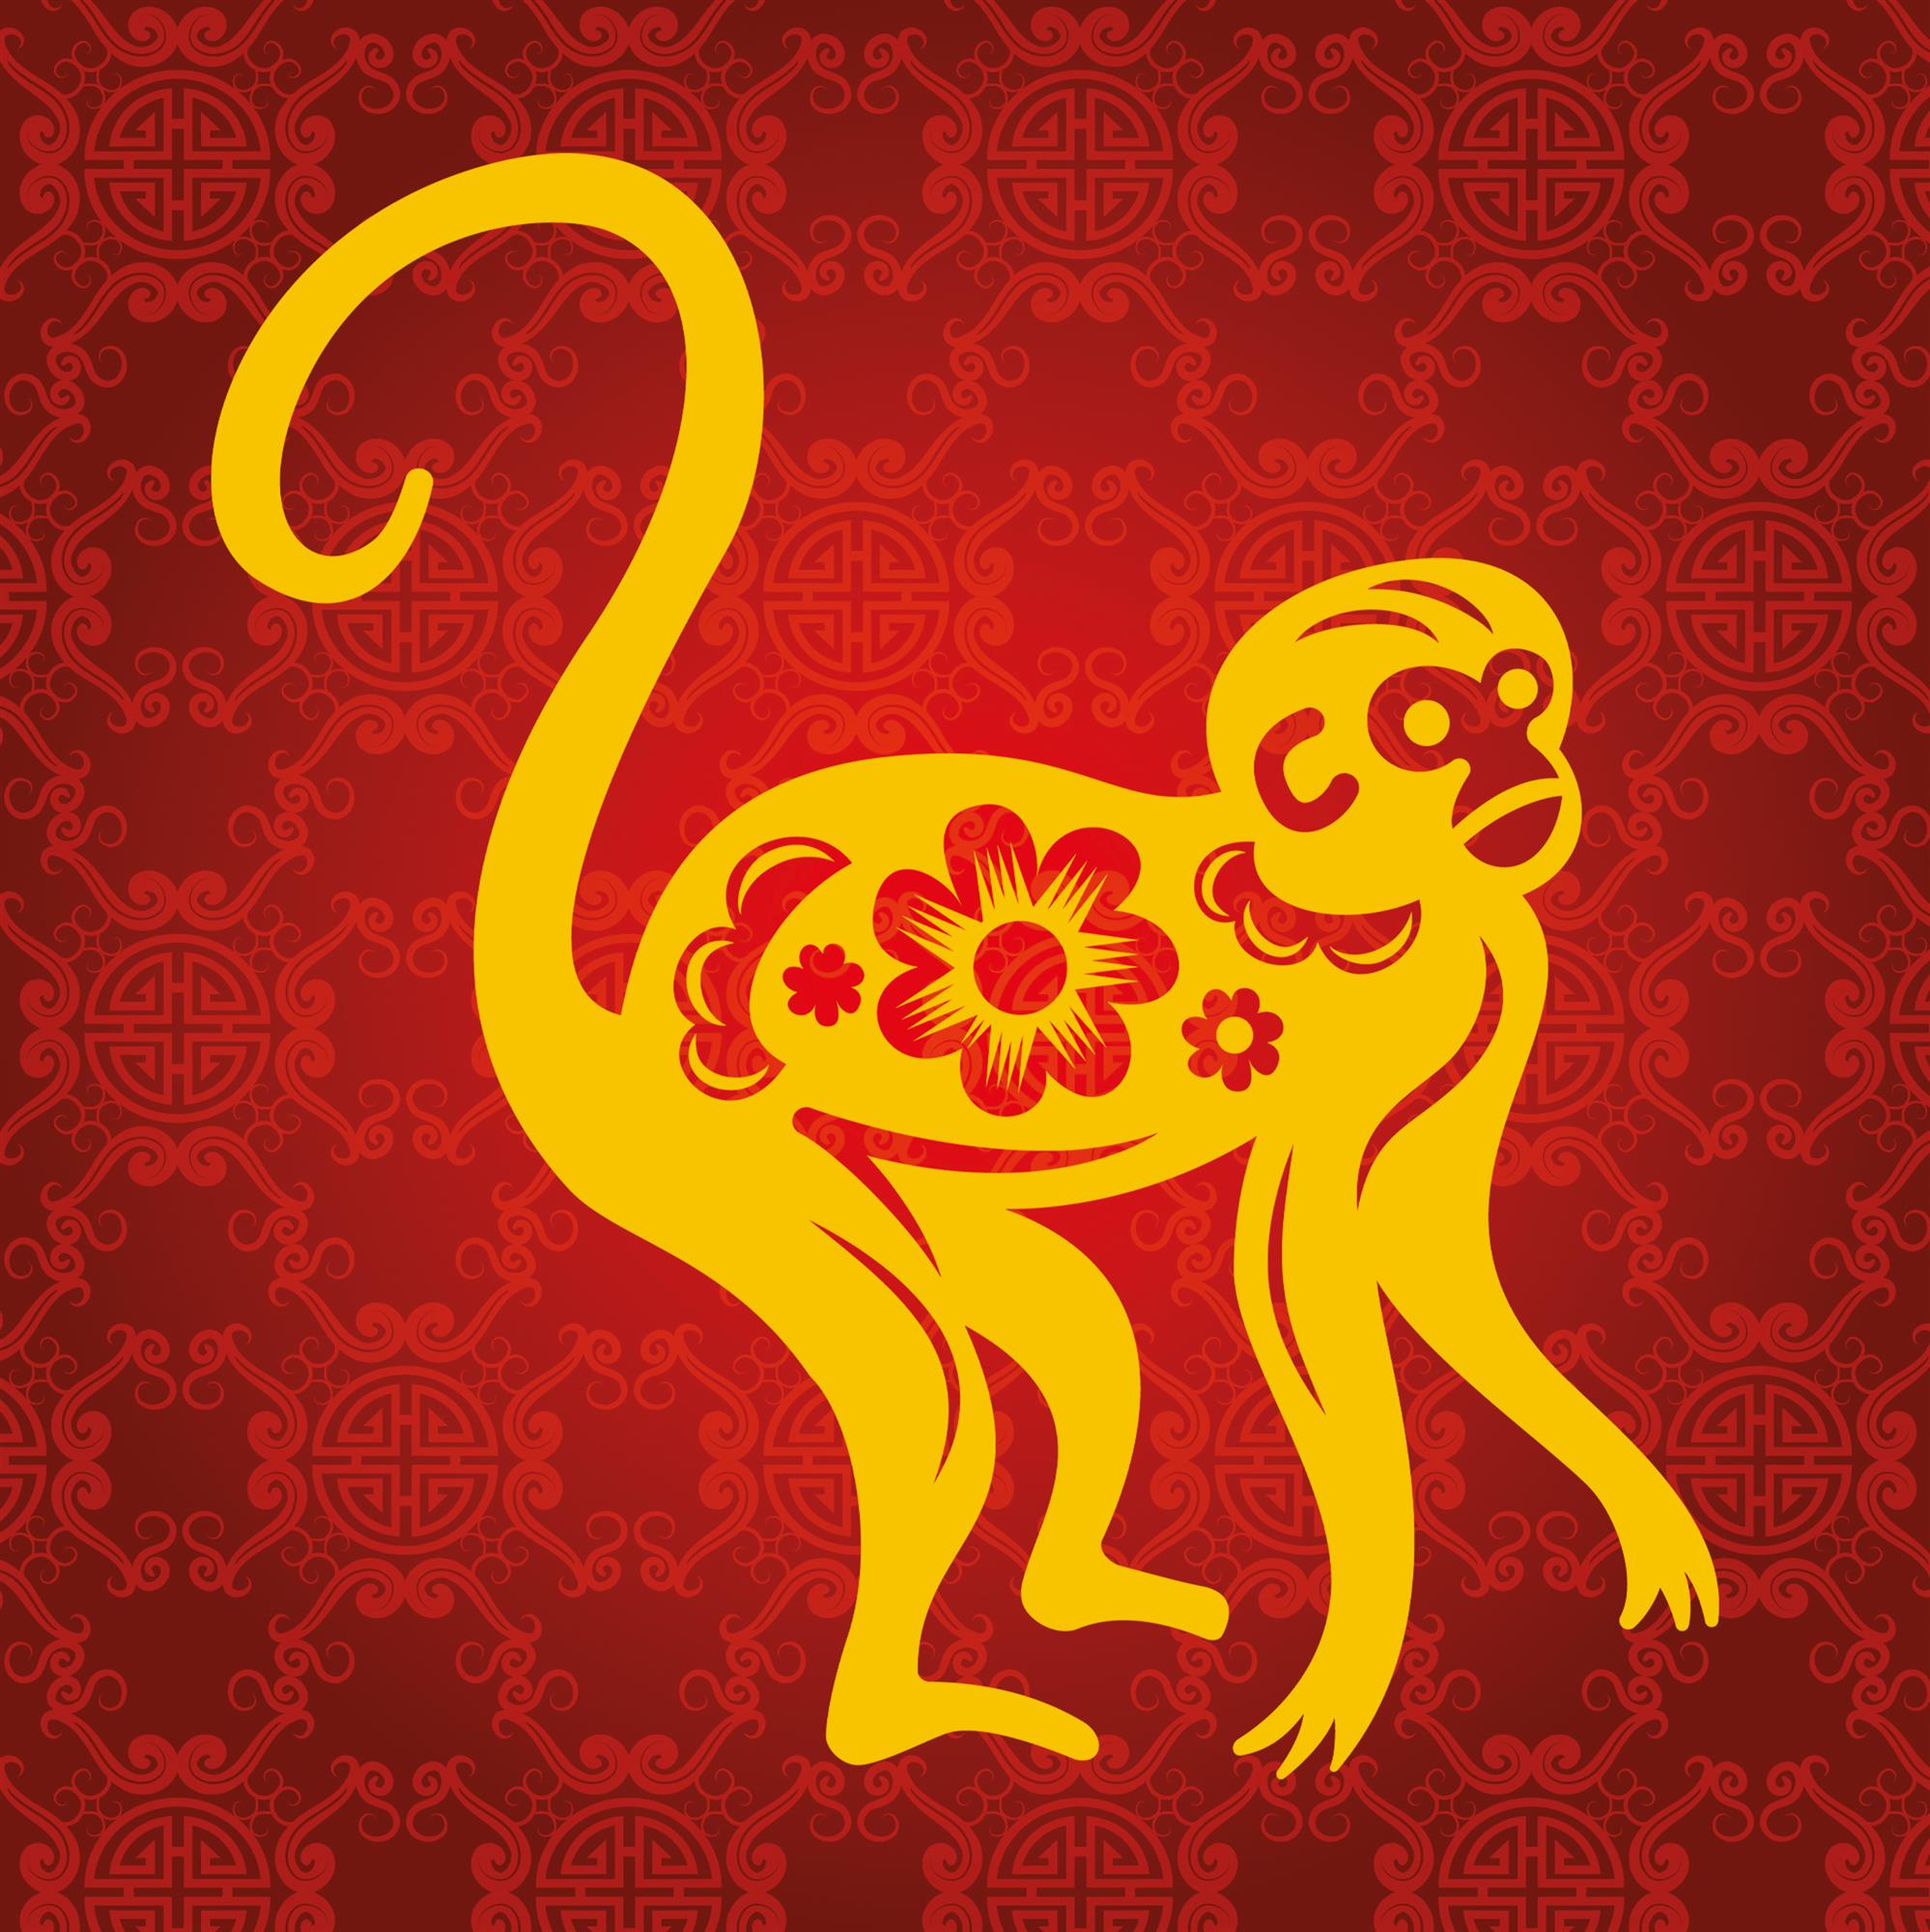 Red and yellow Chinese Style illustration of a monkey